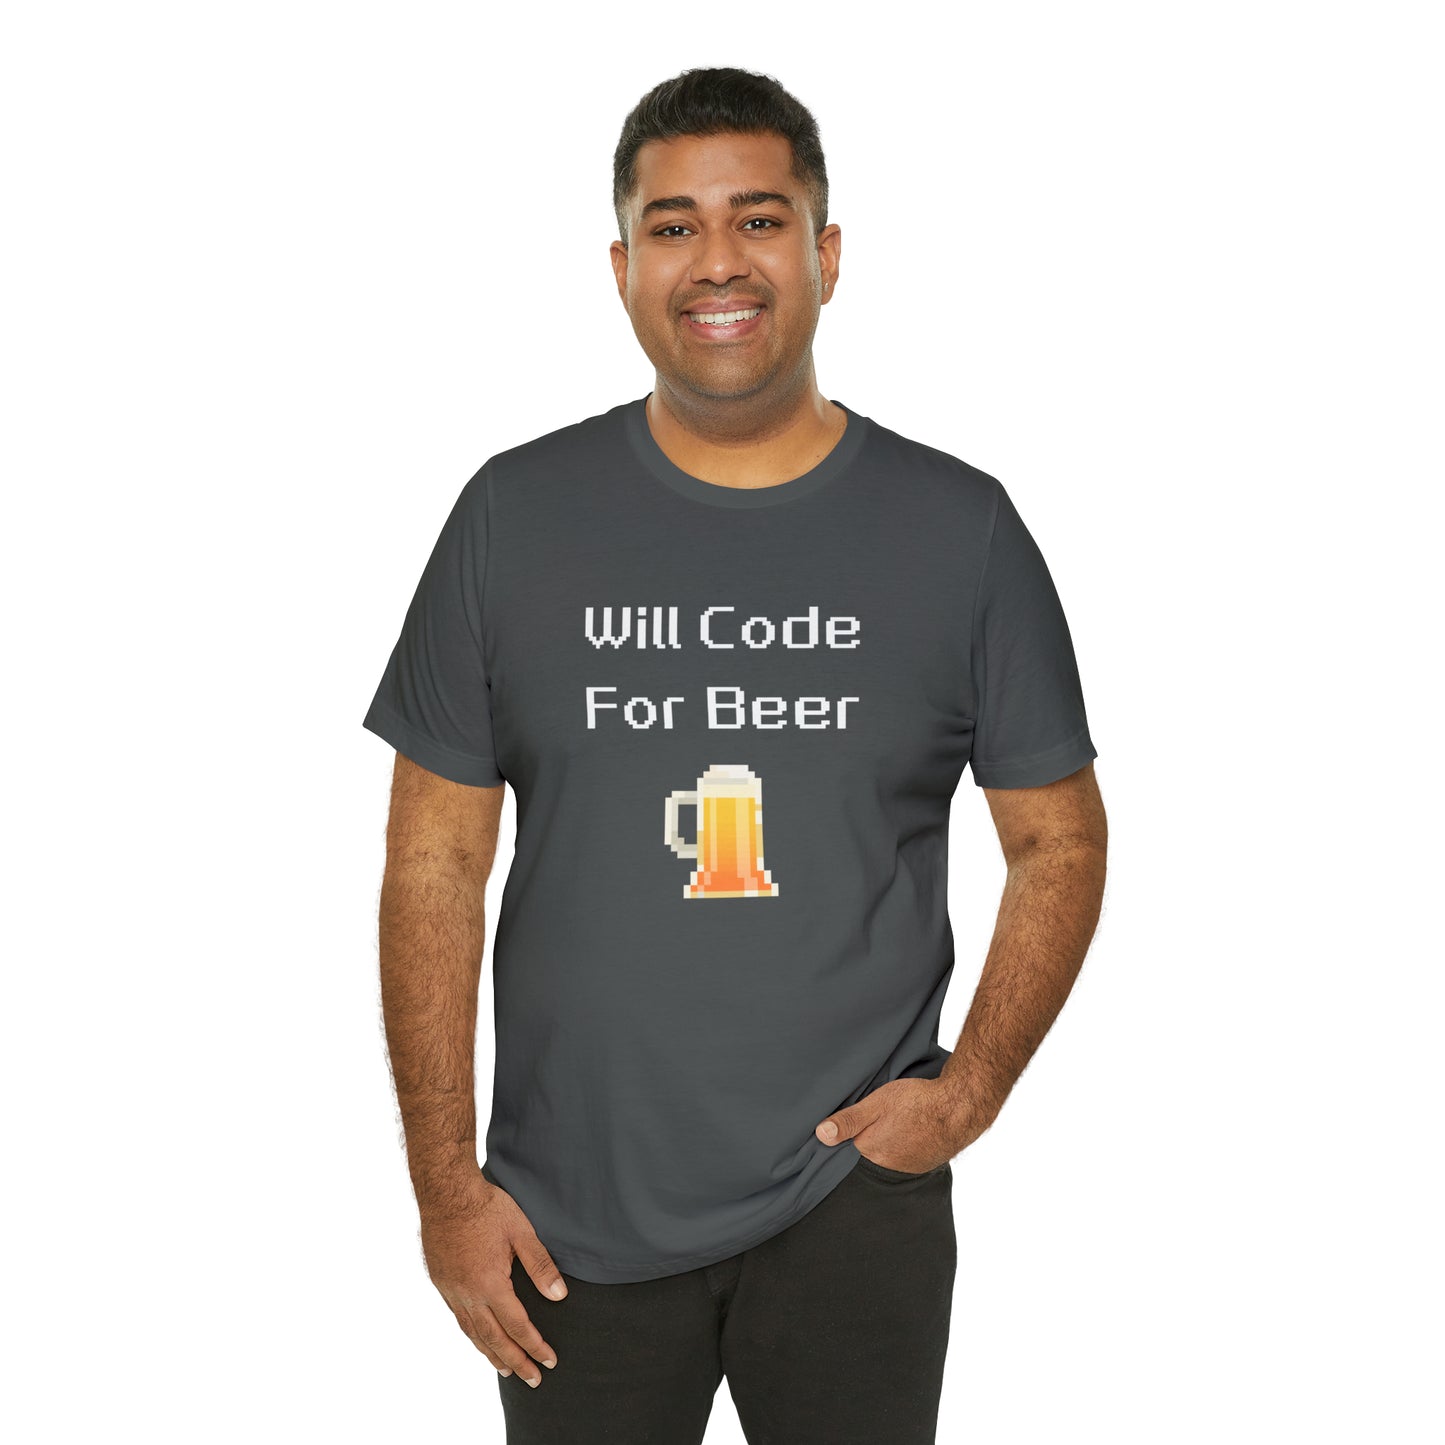 Will Code For Beer - 8-Bit Font With Beer Icon | T-Shirt